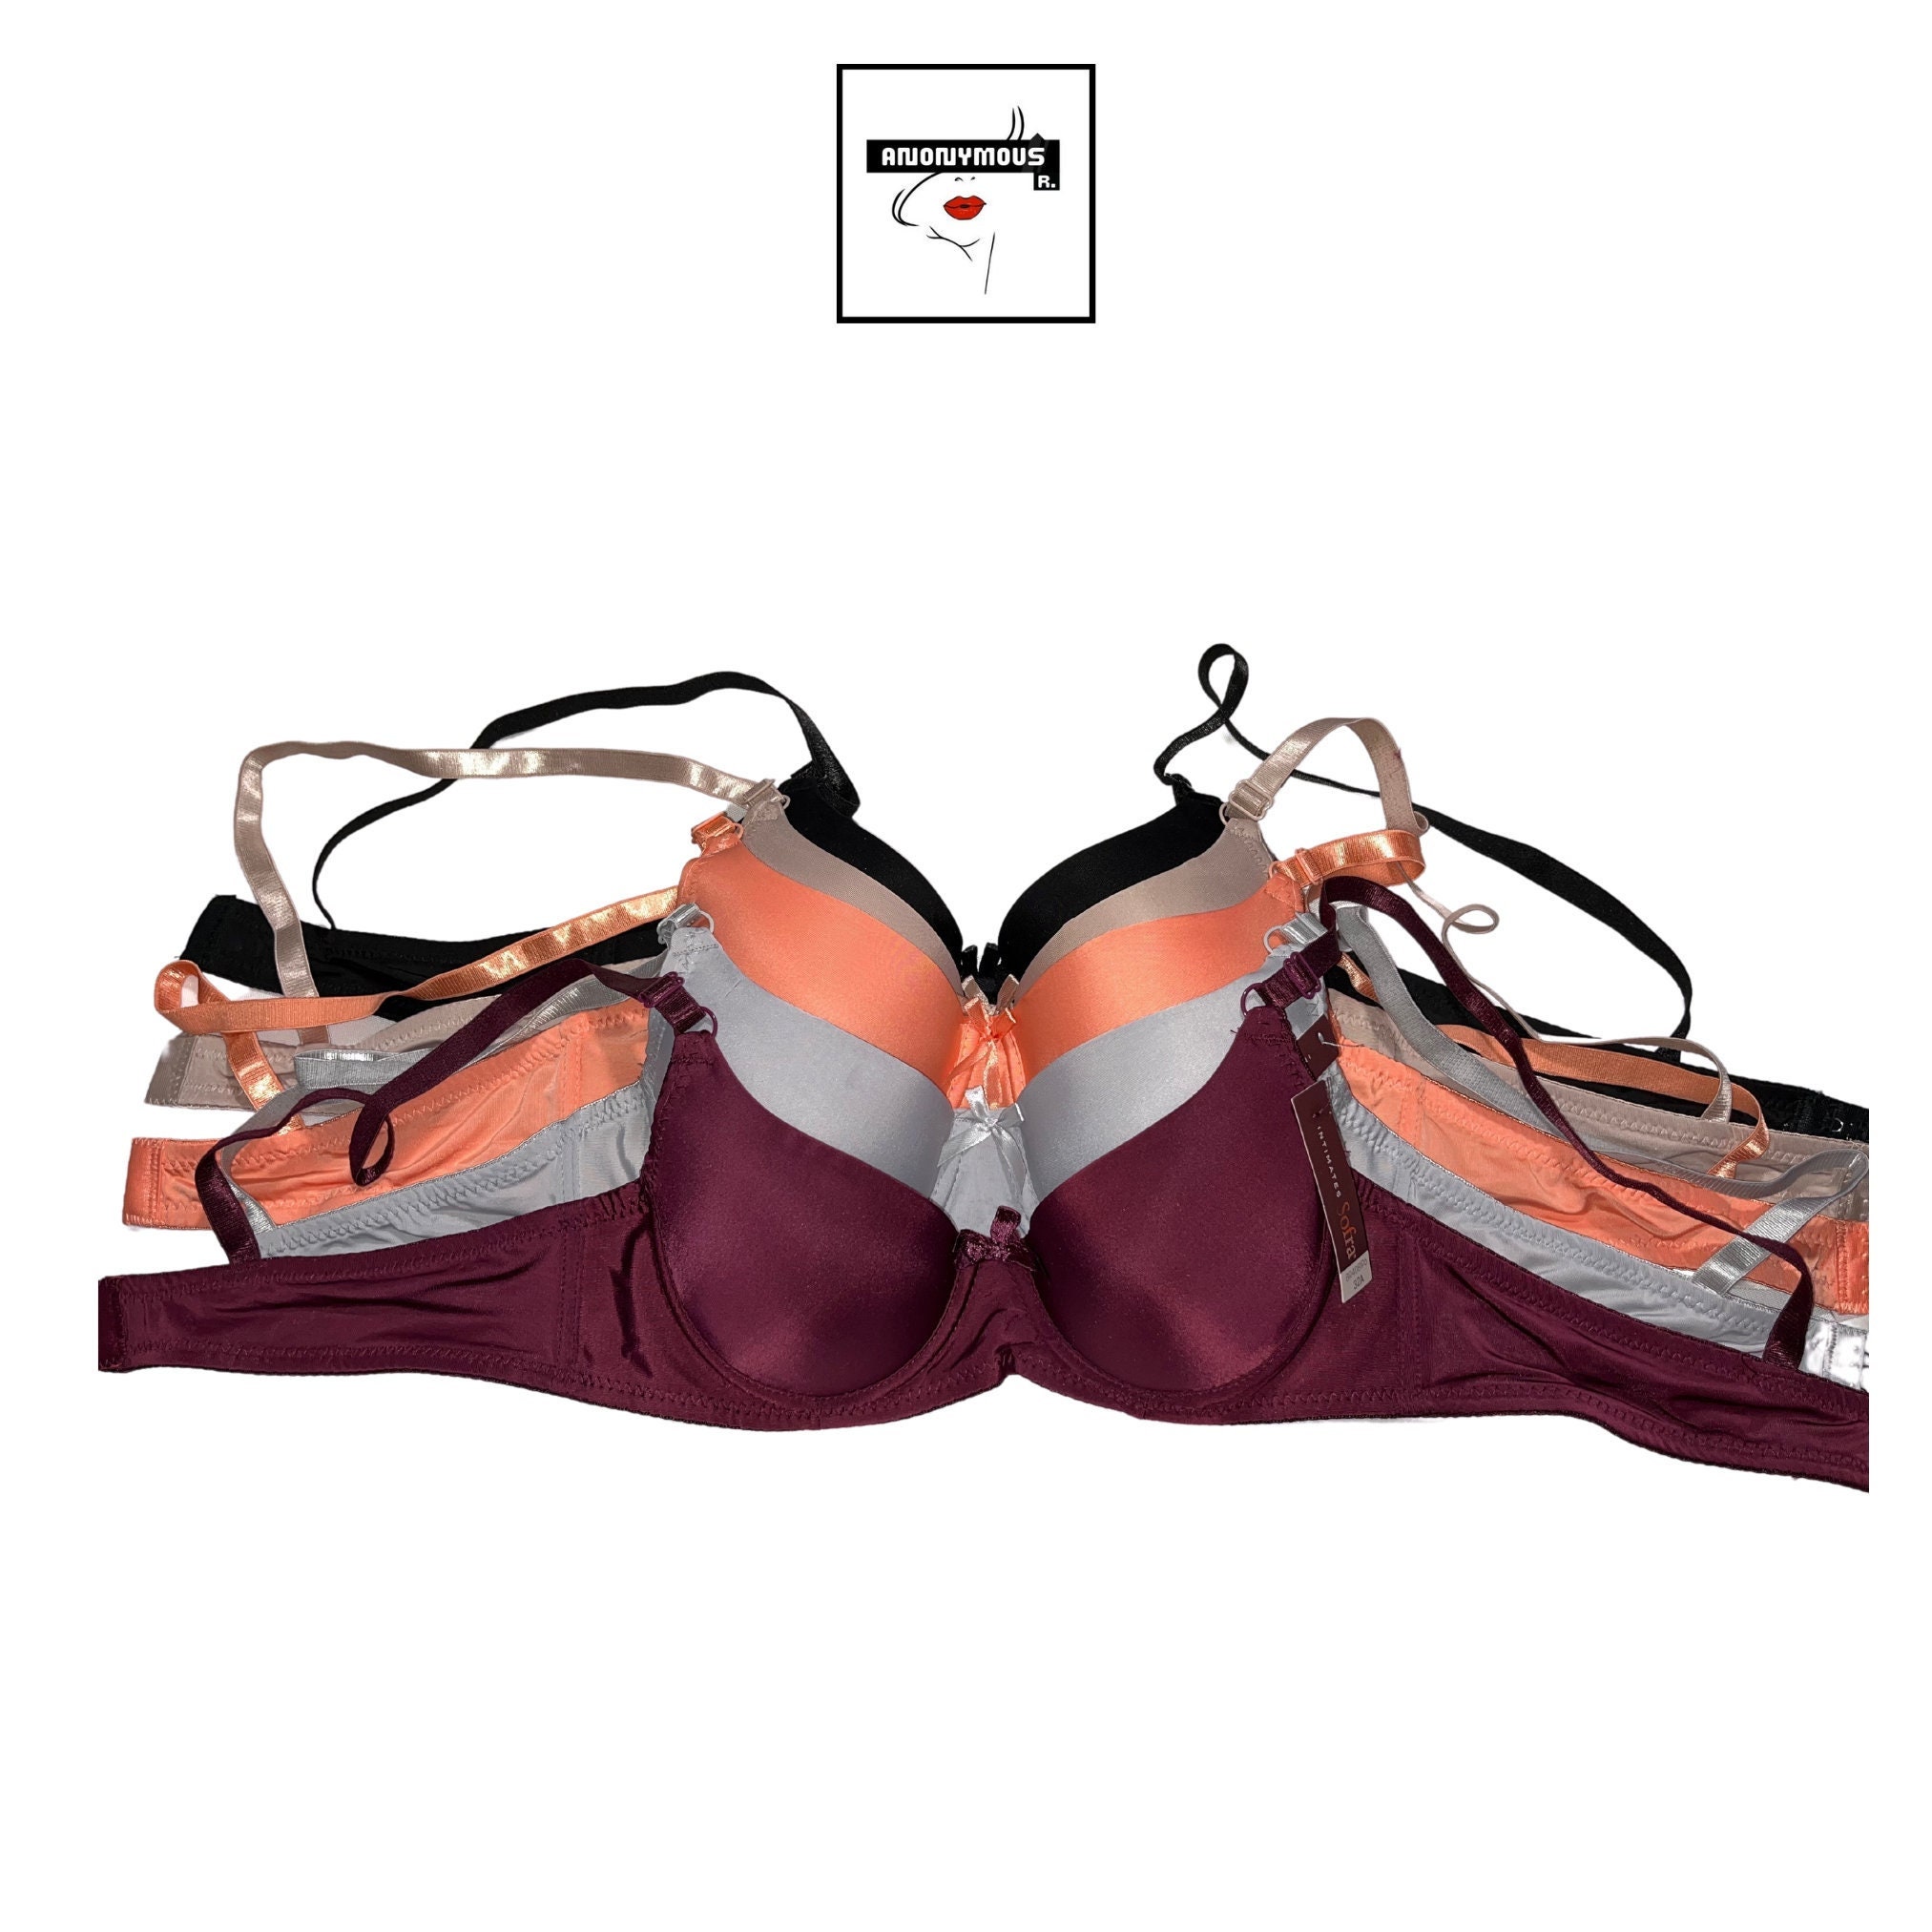 28A and 30A Bras – BRAS FOR SMALL CUPS